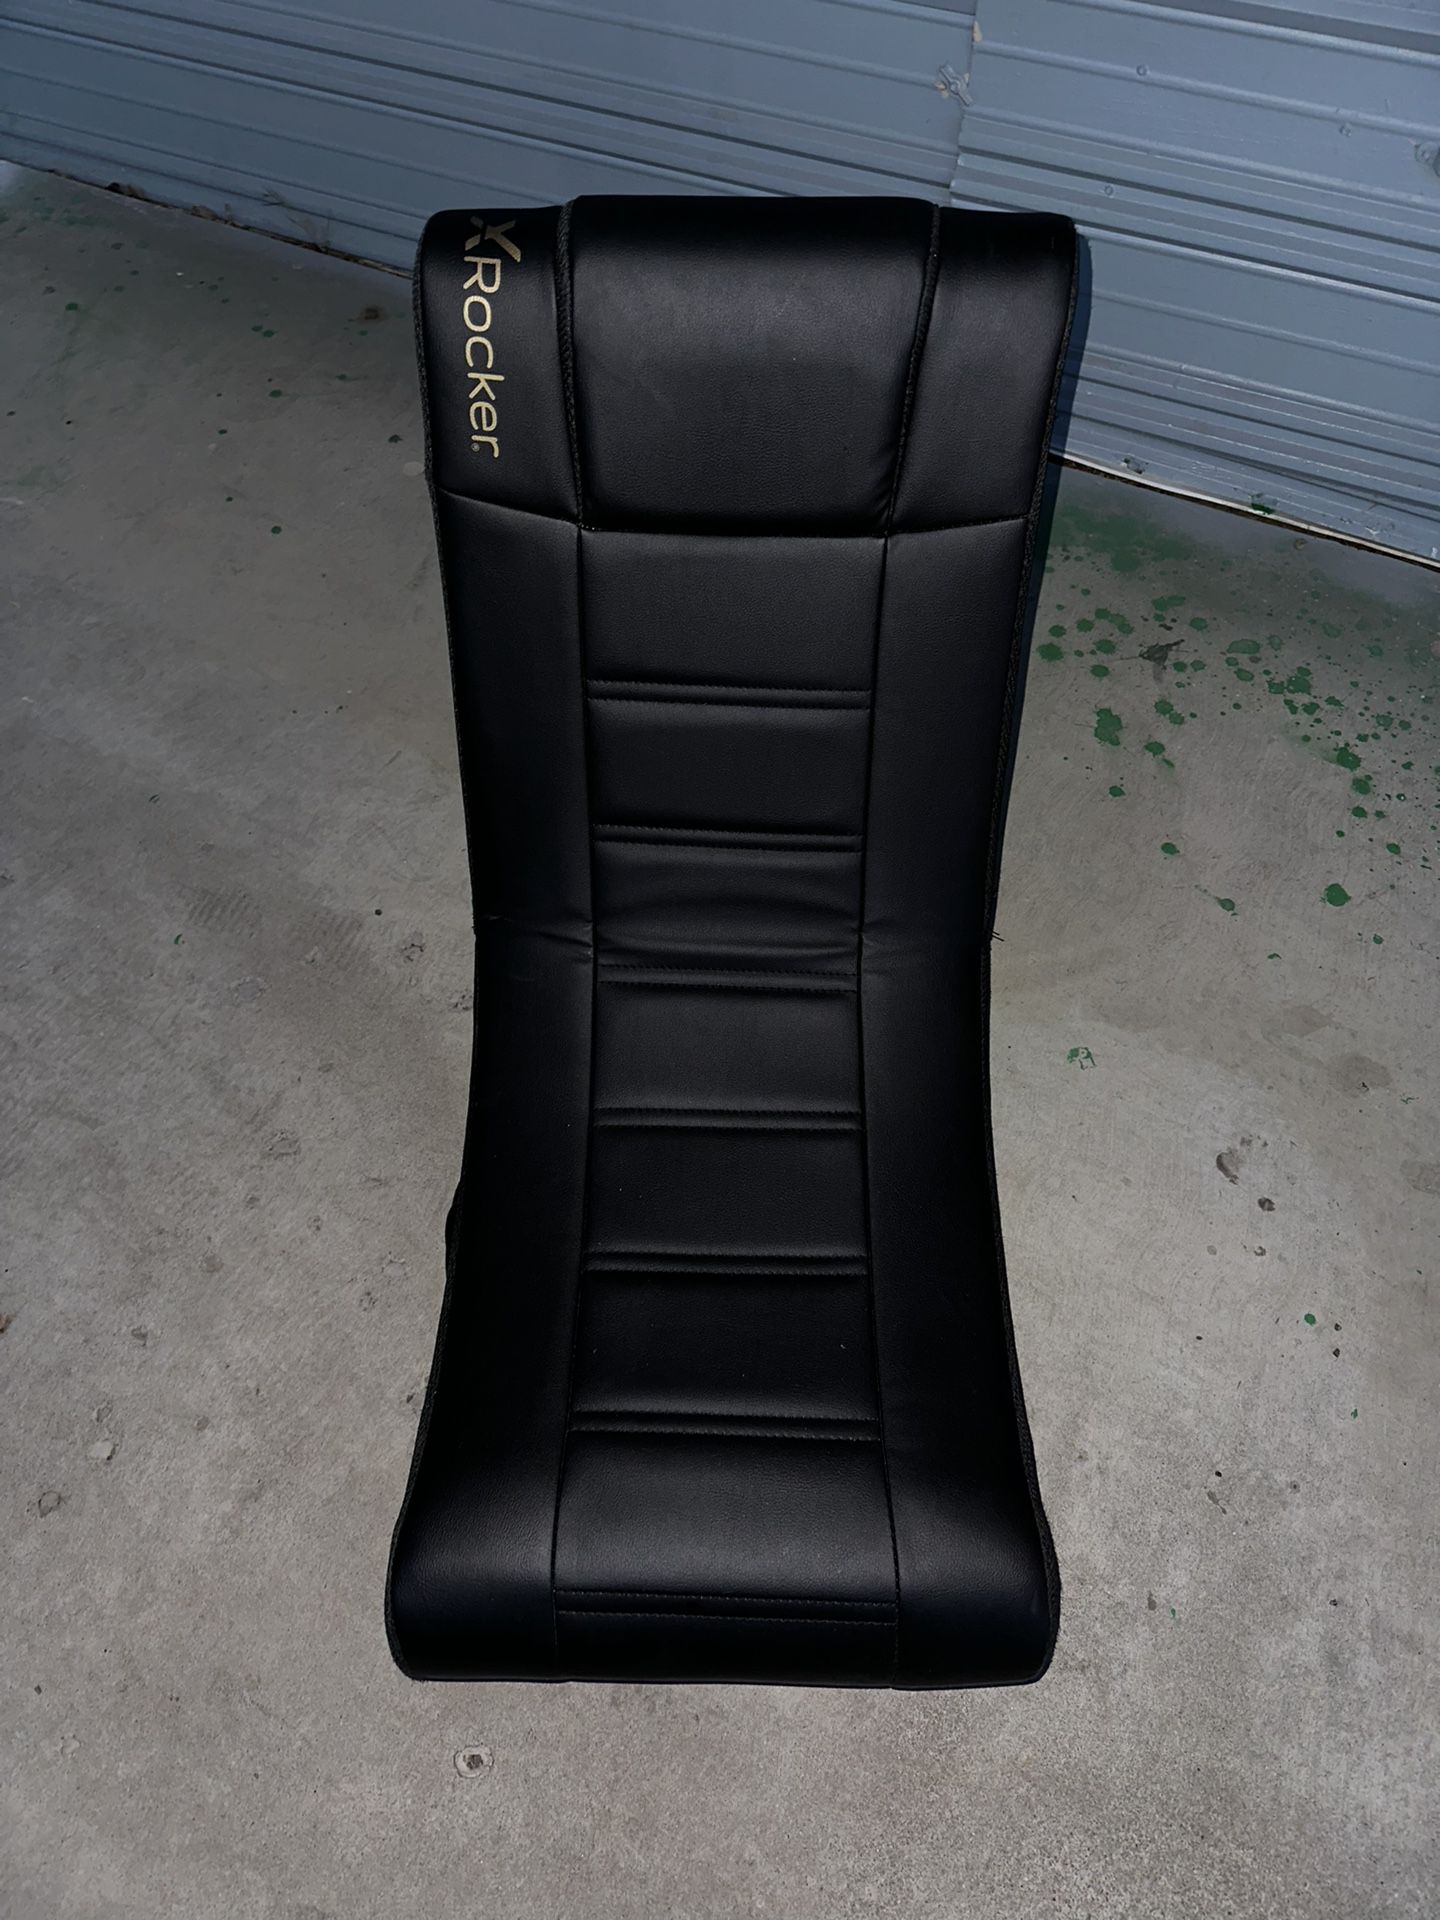 Xrocker Gaming Chairs With Speakers